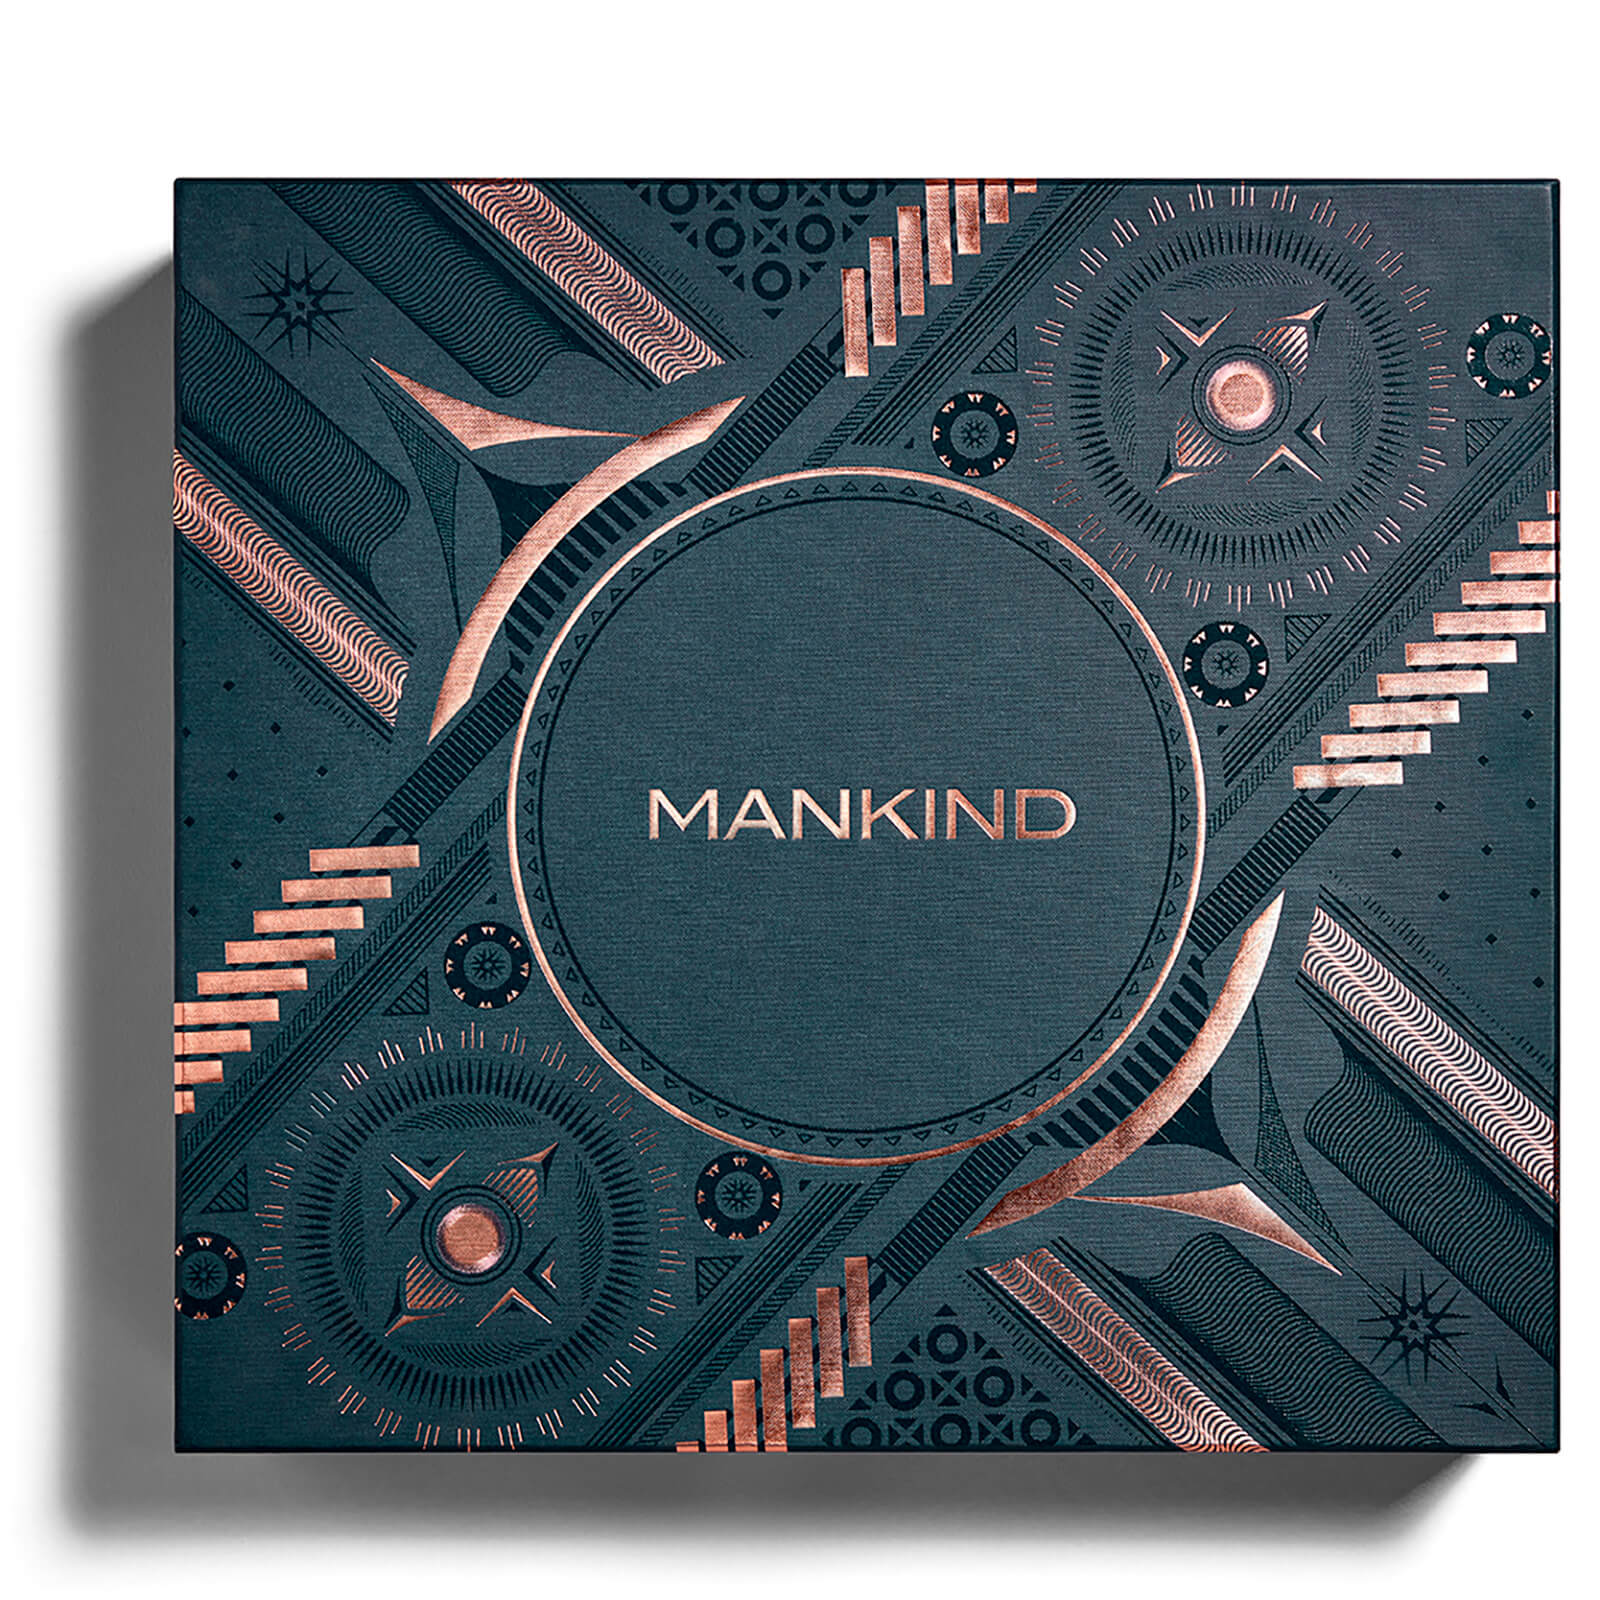 Mankind 2018 Advent Calendar – Available Now + Spoilers!